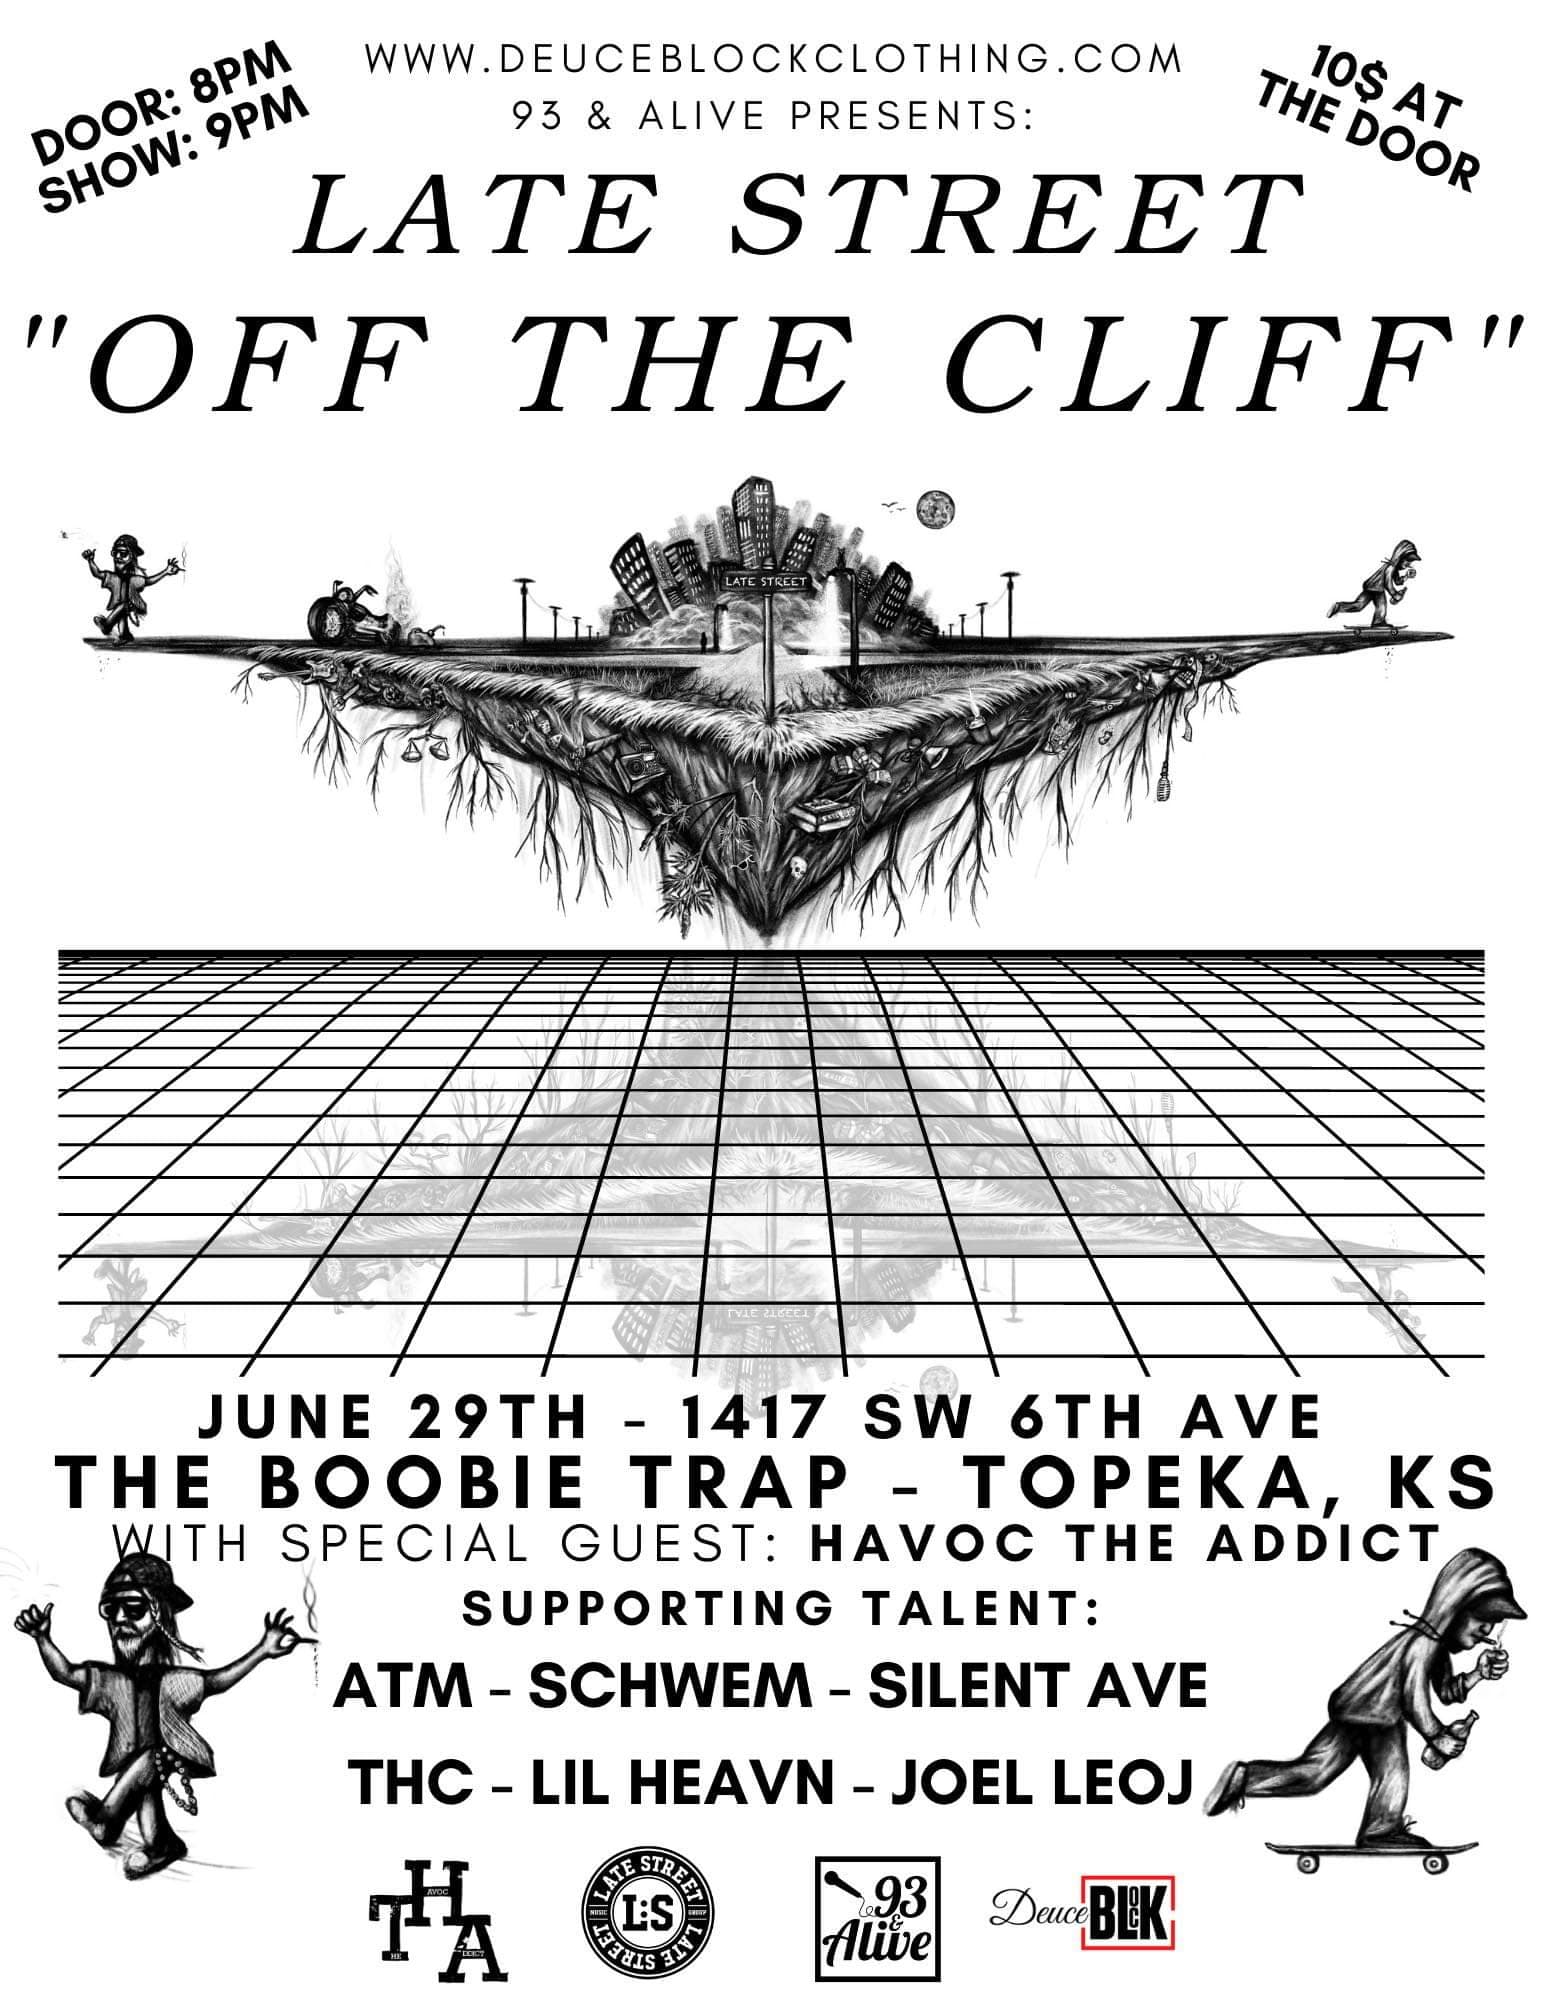 Off The Cliff